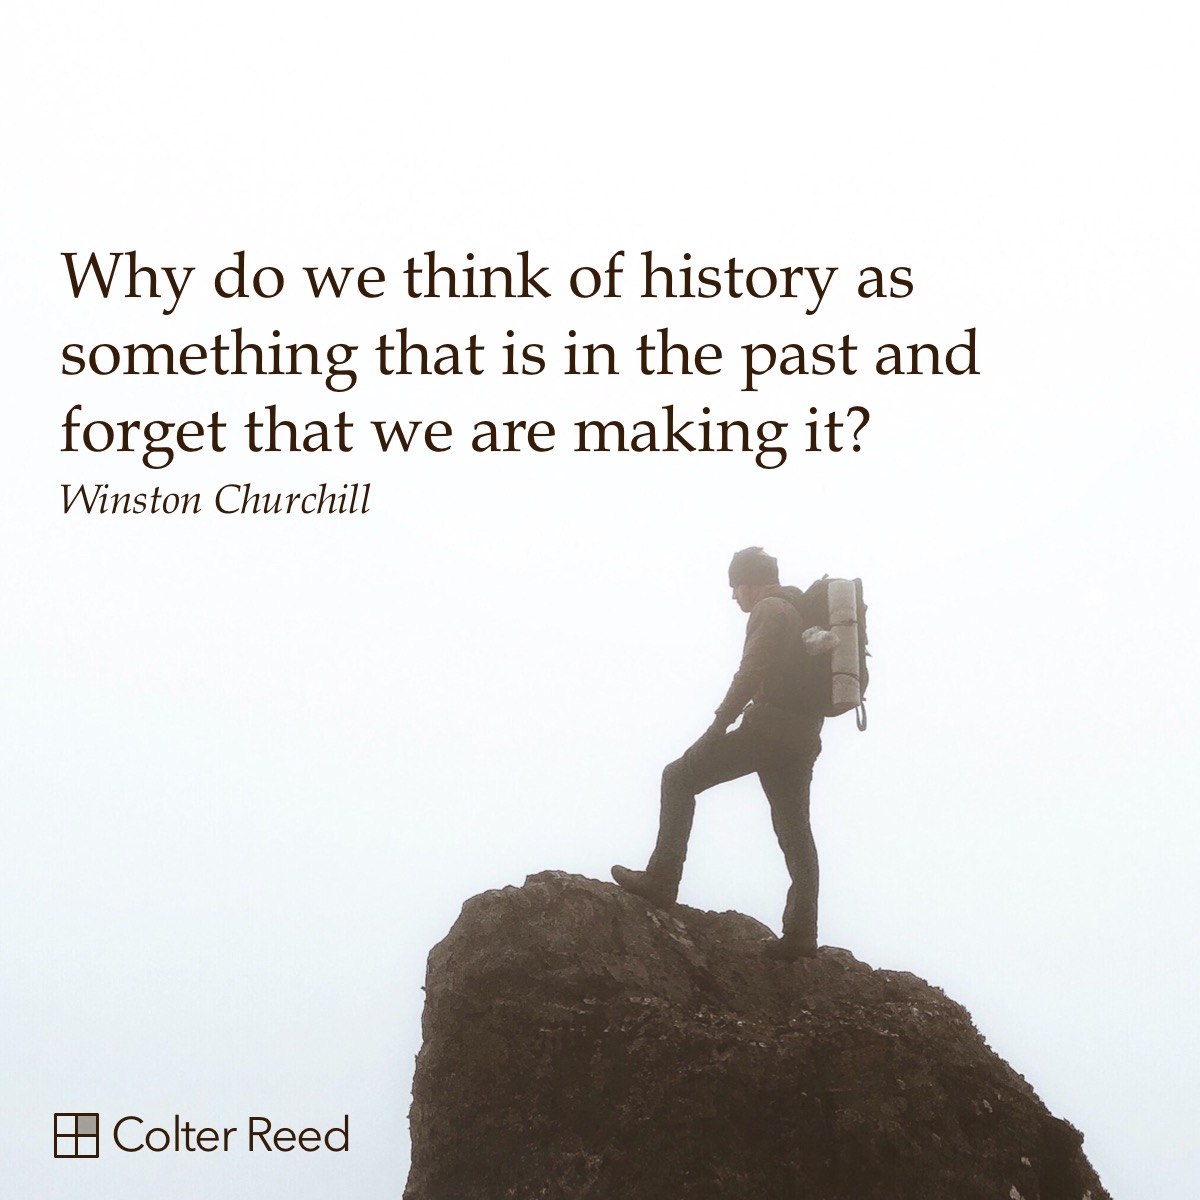 Why do we think of history as something that is in the past and forget that we are making it? —Winston Churchill